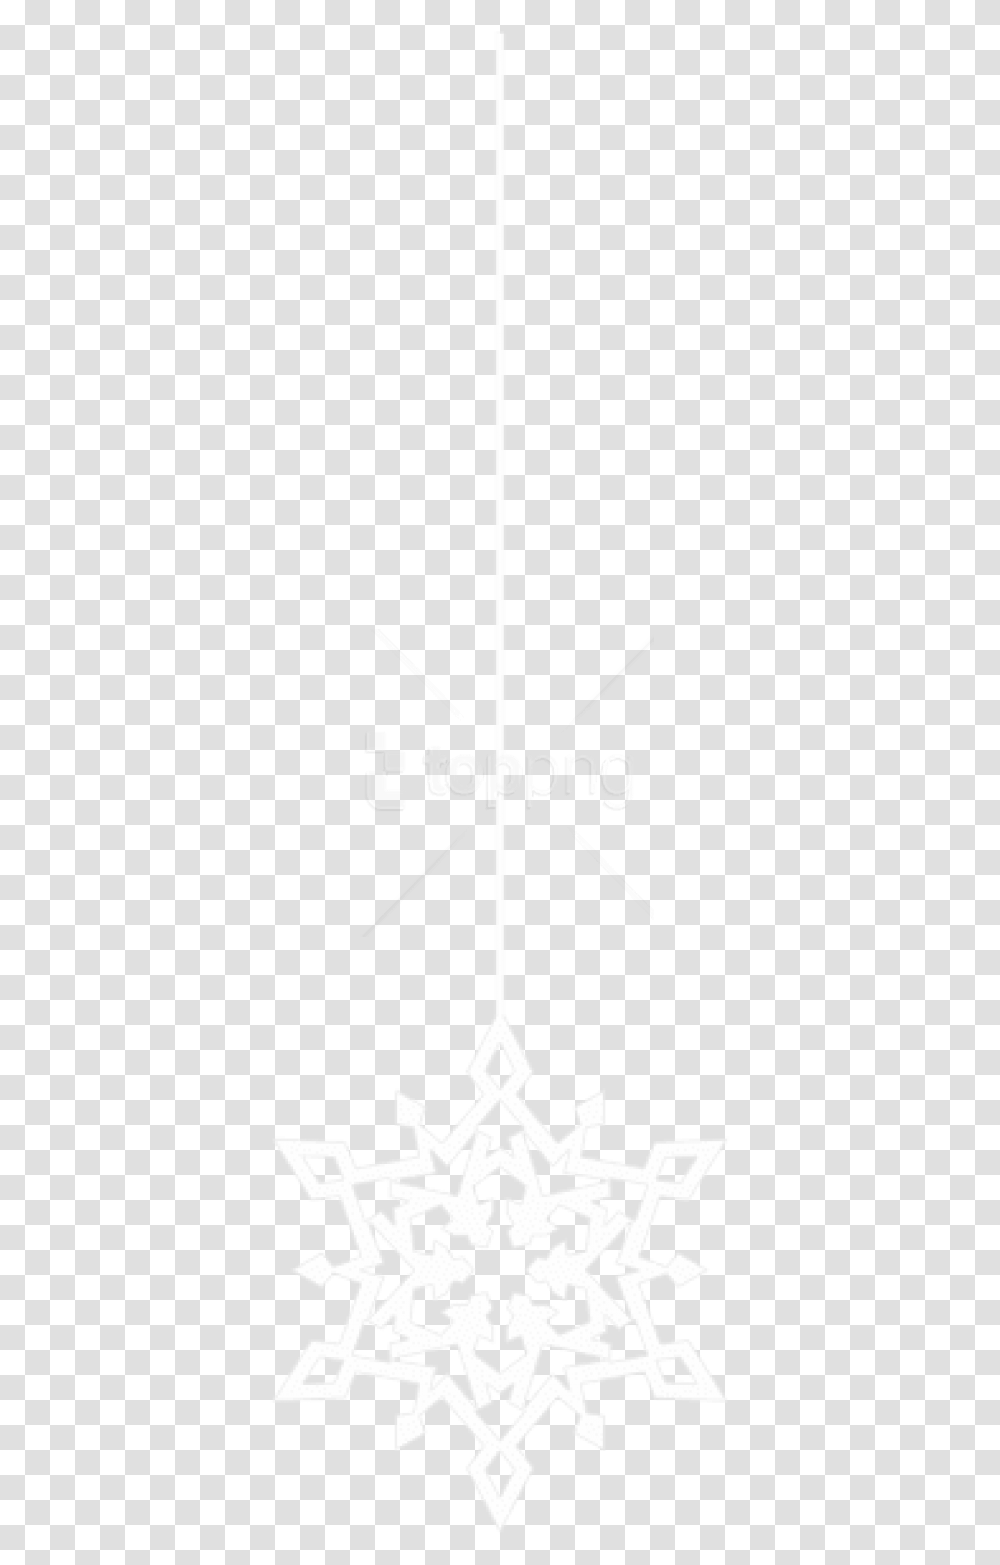 Free Hanging White Snowflake Darkness, Arrow, Sign, Road Sign Transparent Png